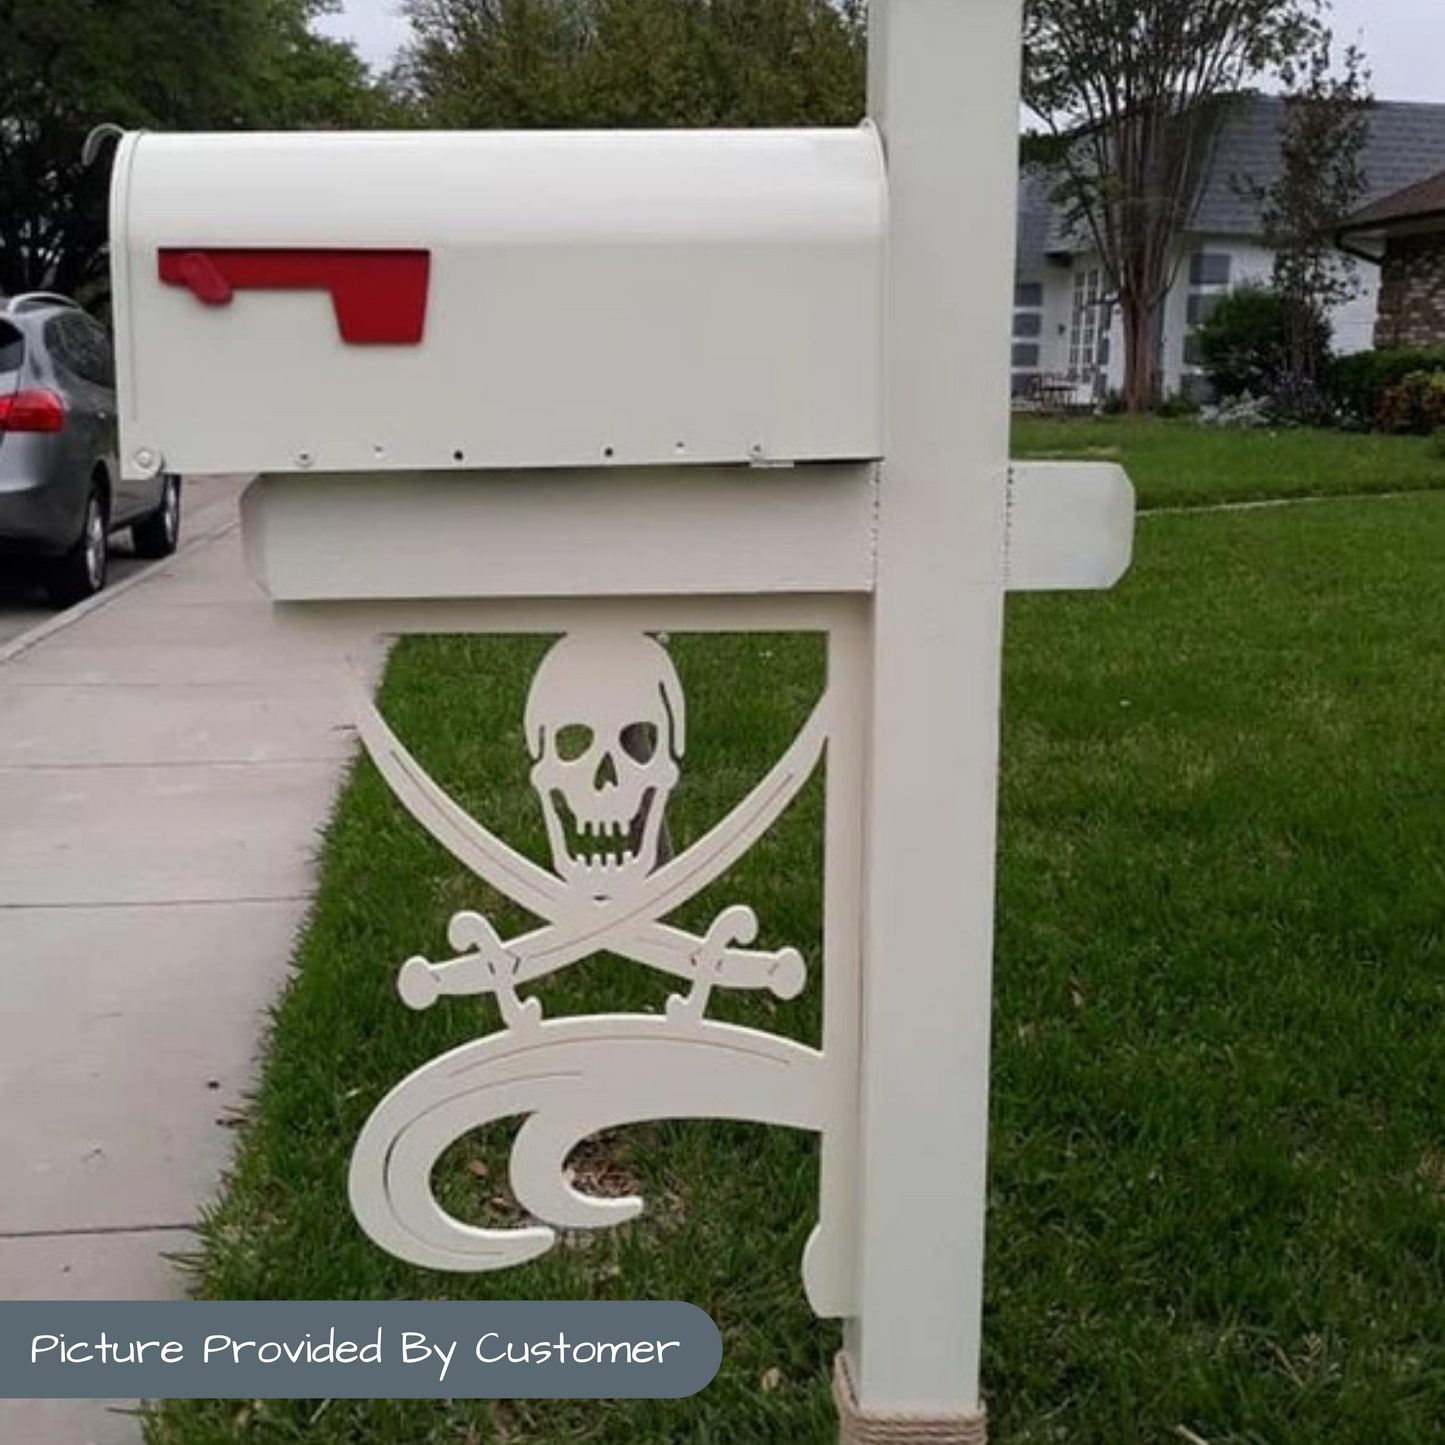 Mailbox Bracket - Pirate Wave Large 16x21 inch, Custom Mailbox, Coastal, Tropical, Bracket, Outdoor Decor, Mailbox & Post Not Included